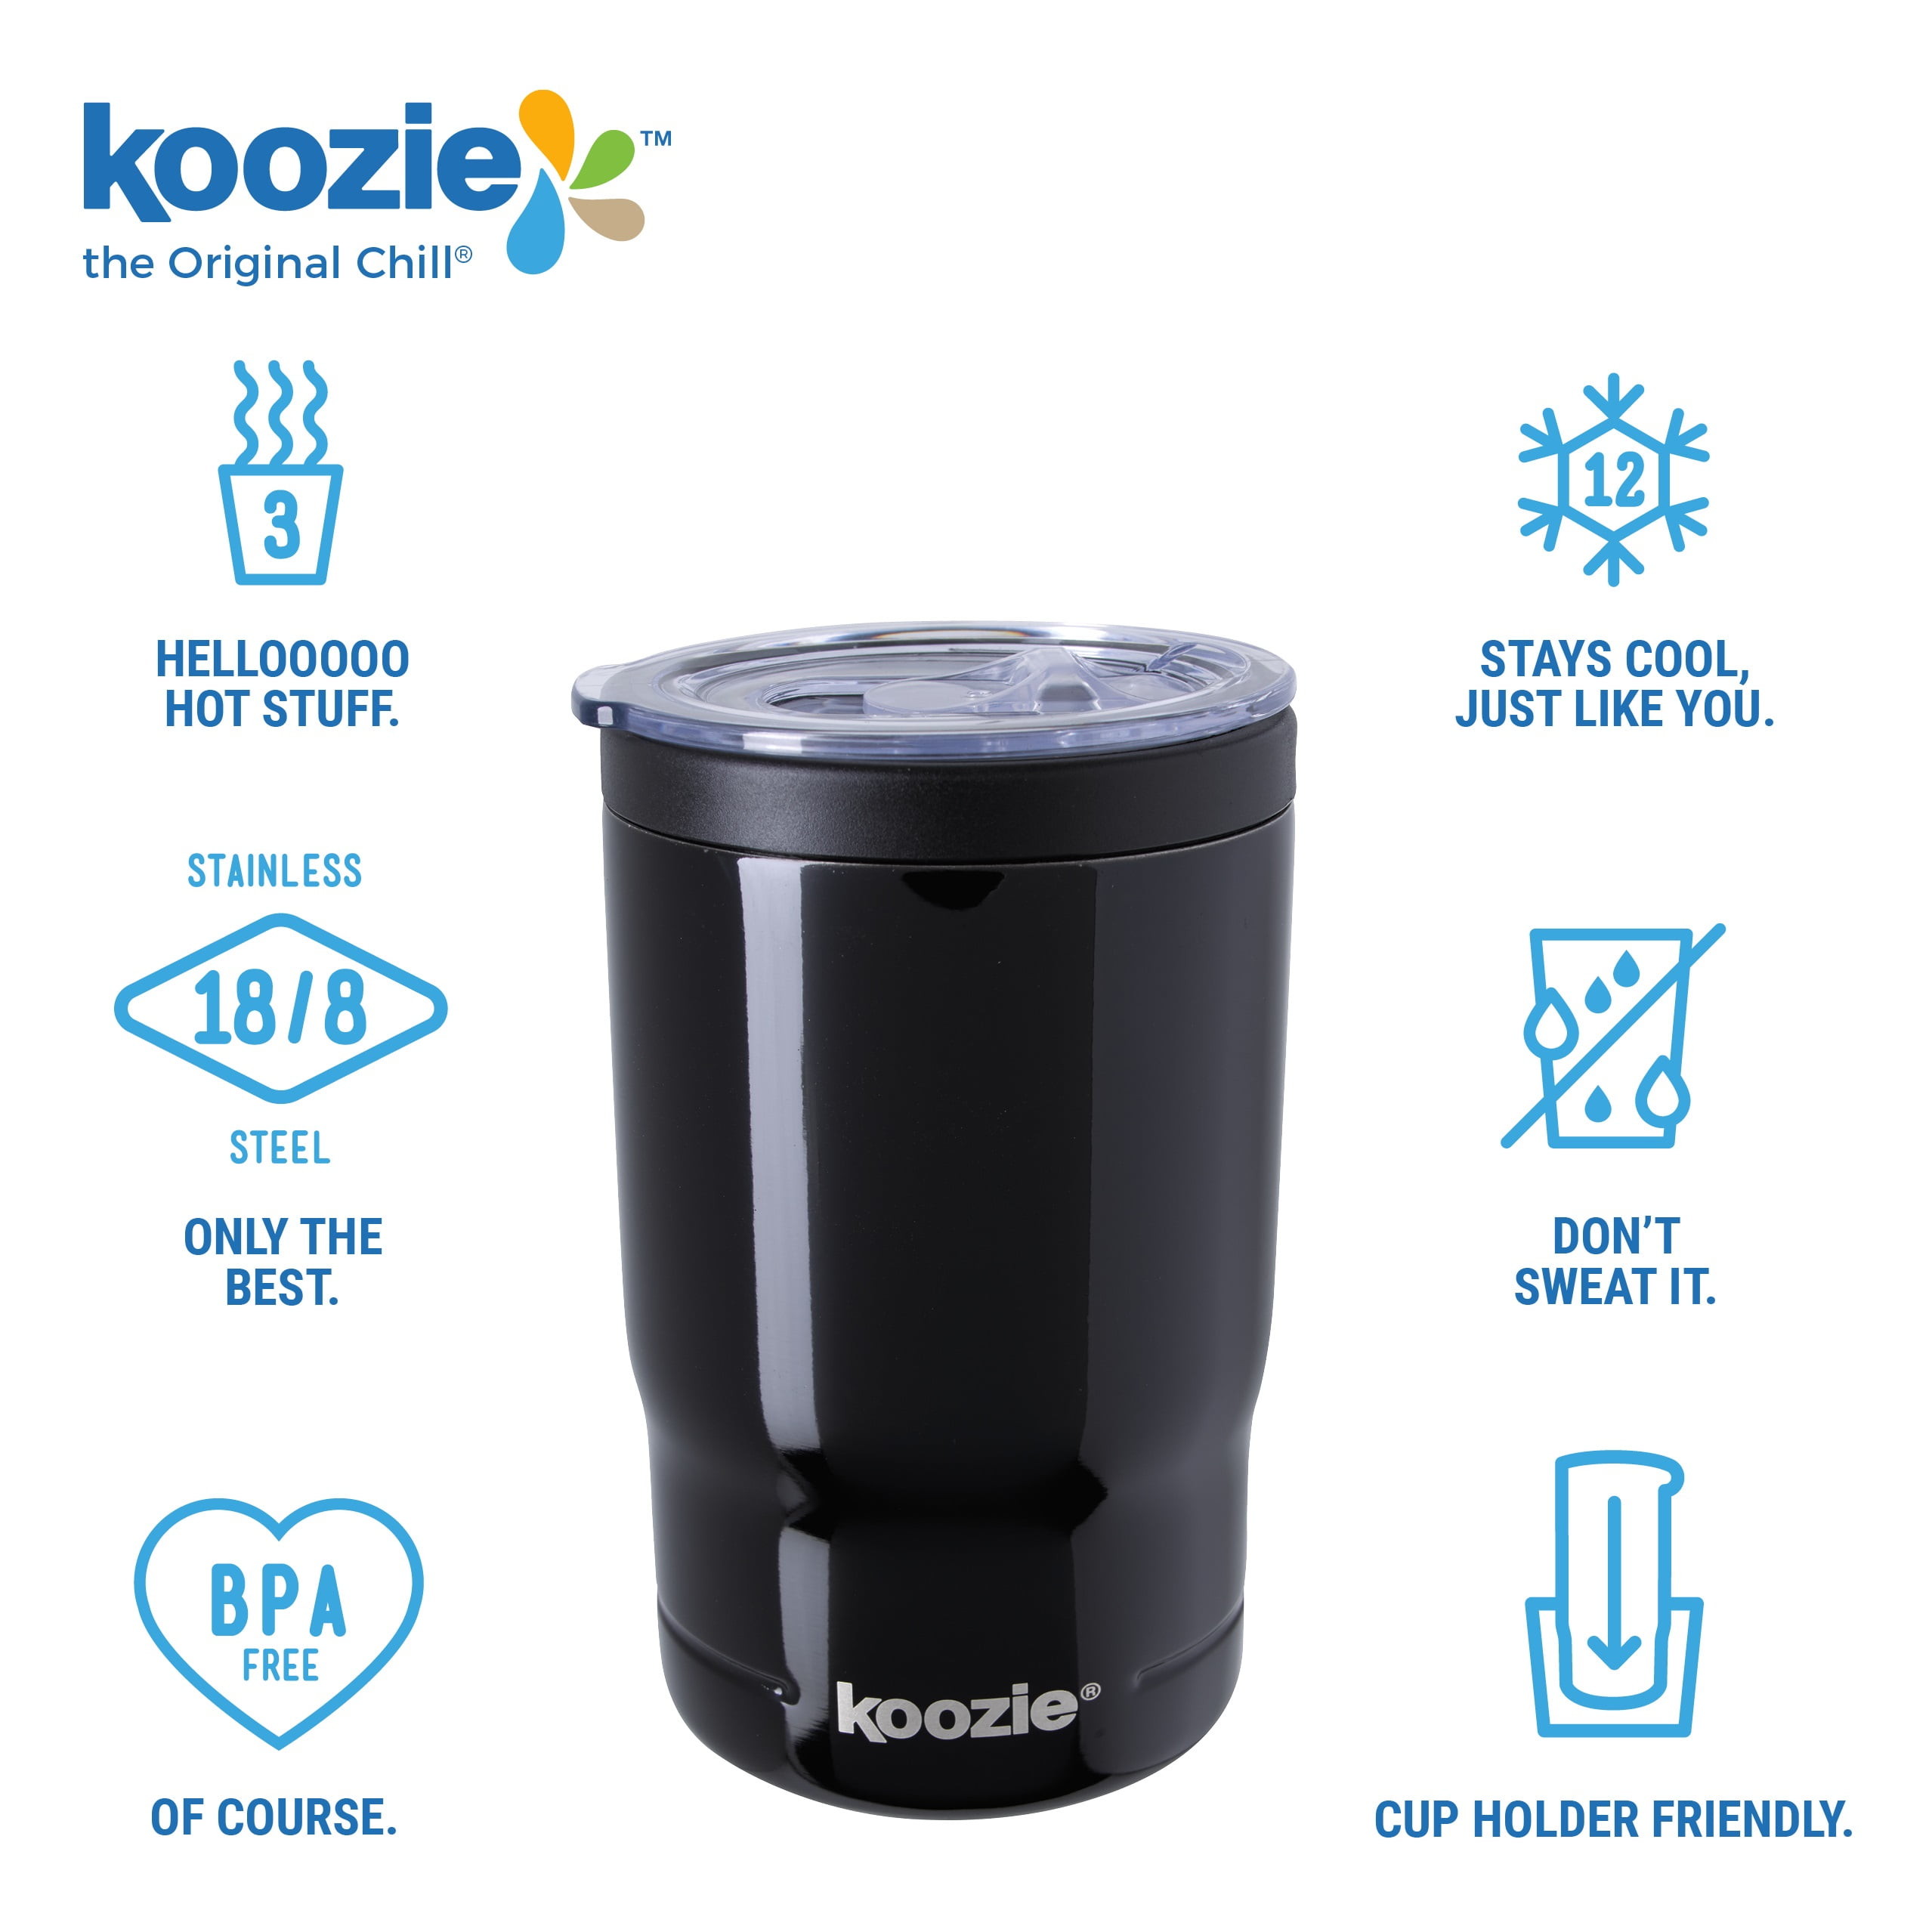 Koozie Triple 12oz Can Cooler, Bottle Holder, Tumbler Stainless Steel Double Wall Vacuum Sealed Insulated for Hot and Cold Drinks, White